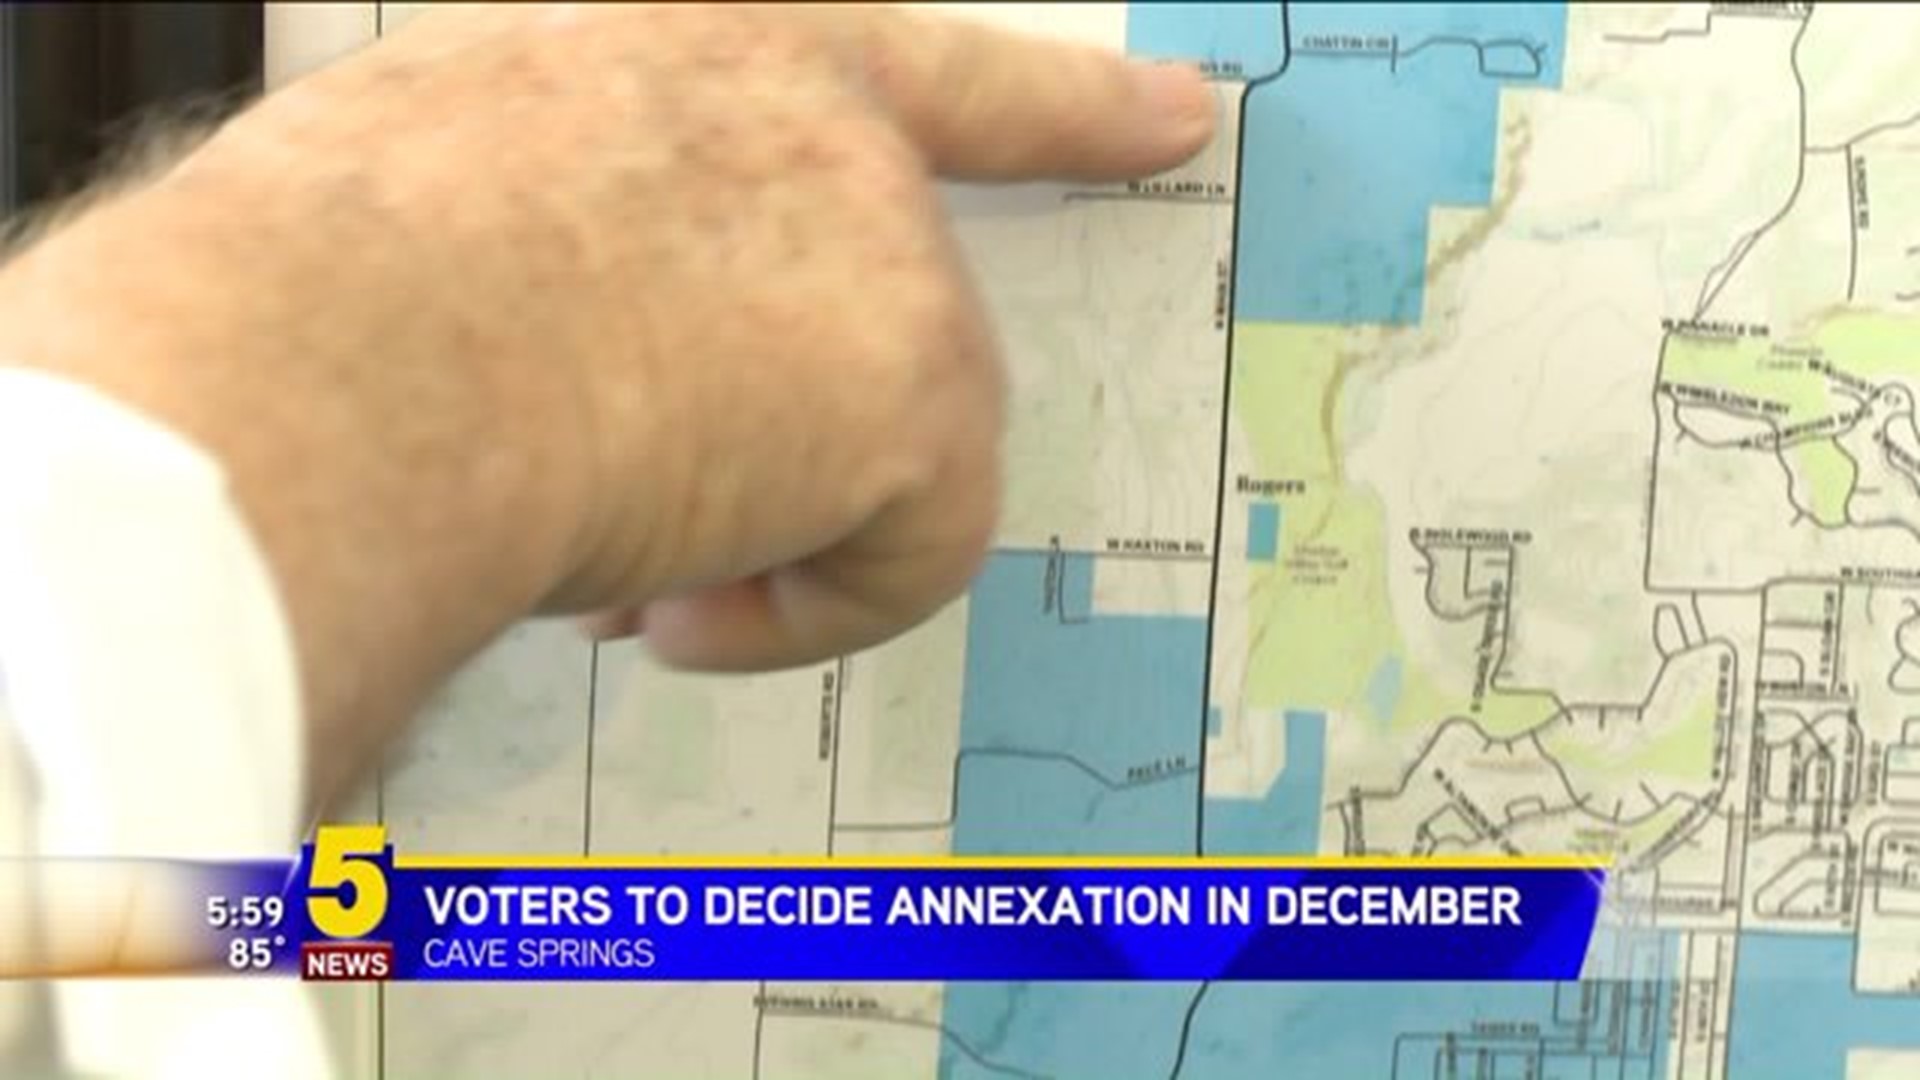 CAVE SPRINGS ANNEXATION VOTE